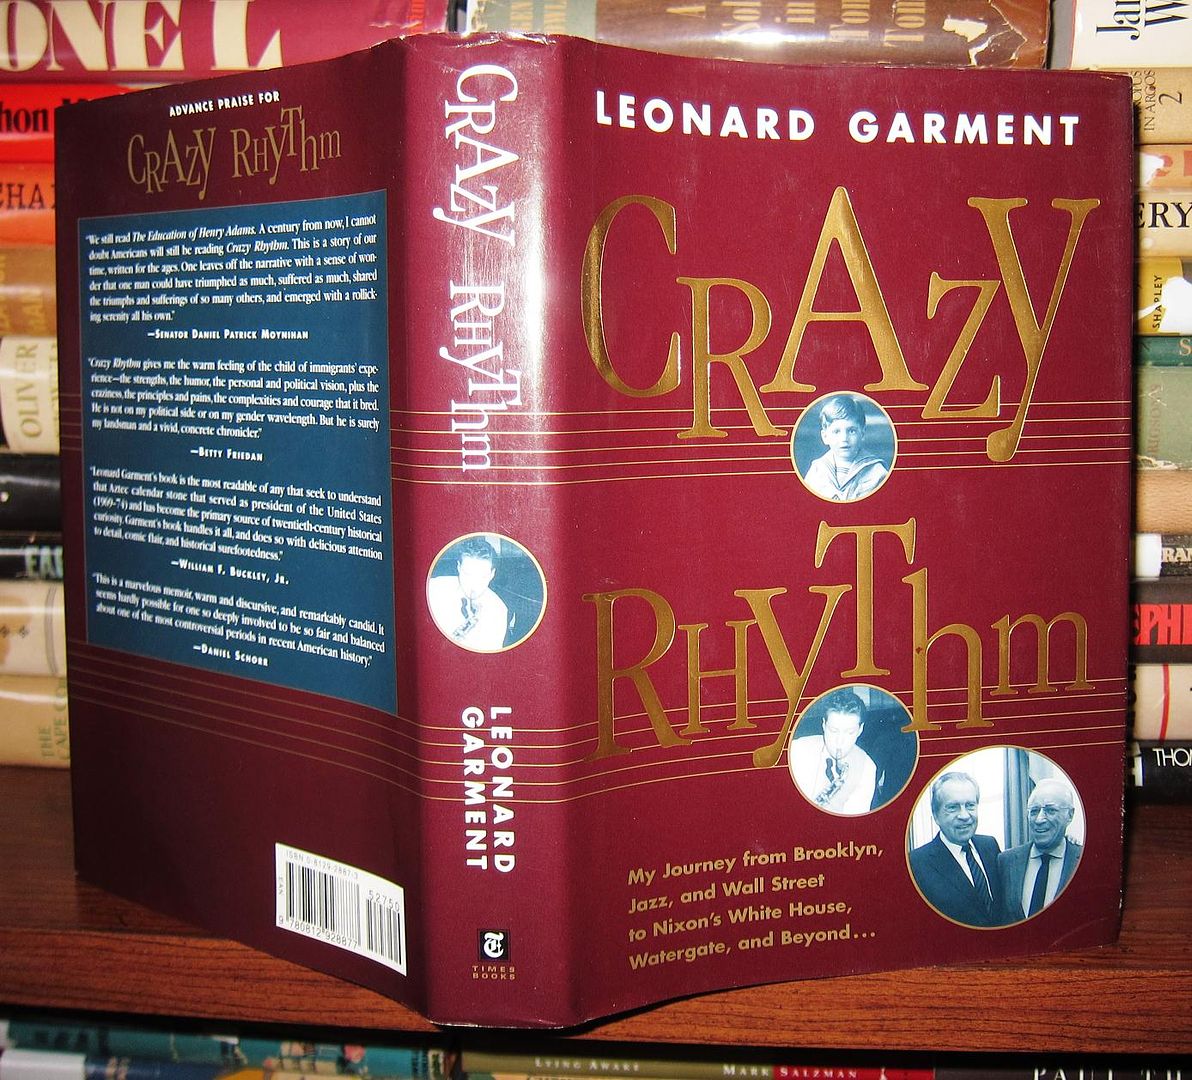 GARMENT, LEONARD - Crazy Rhythm My Journey from Brooklyn, Jazz, and Wall Street to Nixon's White House, Watergate, and Beyond...